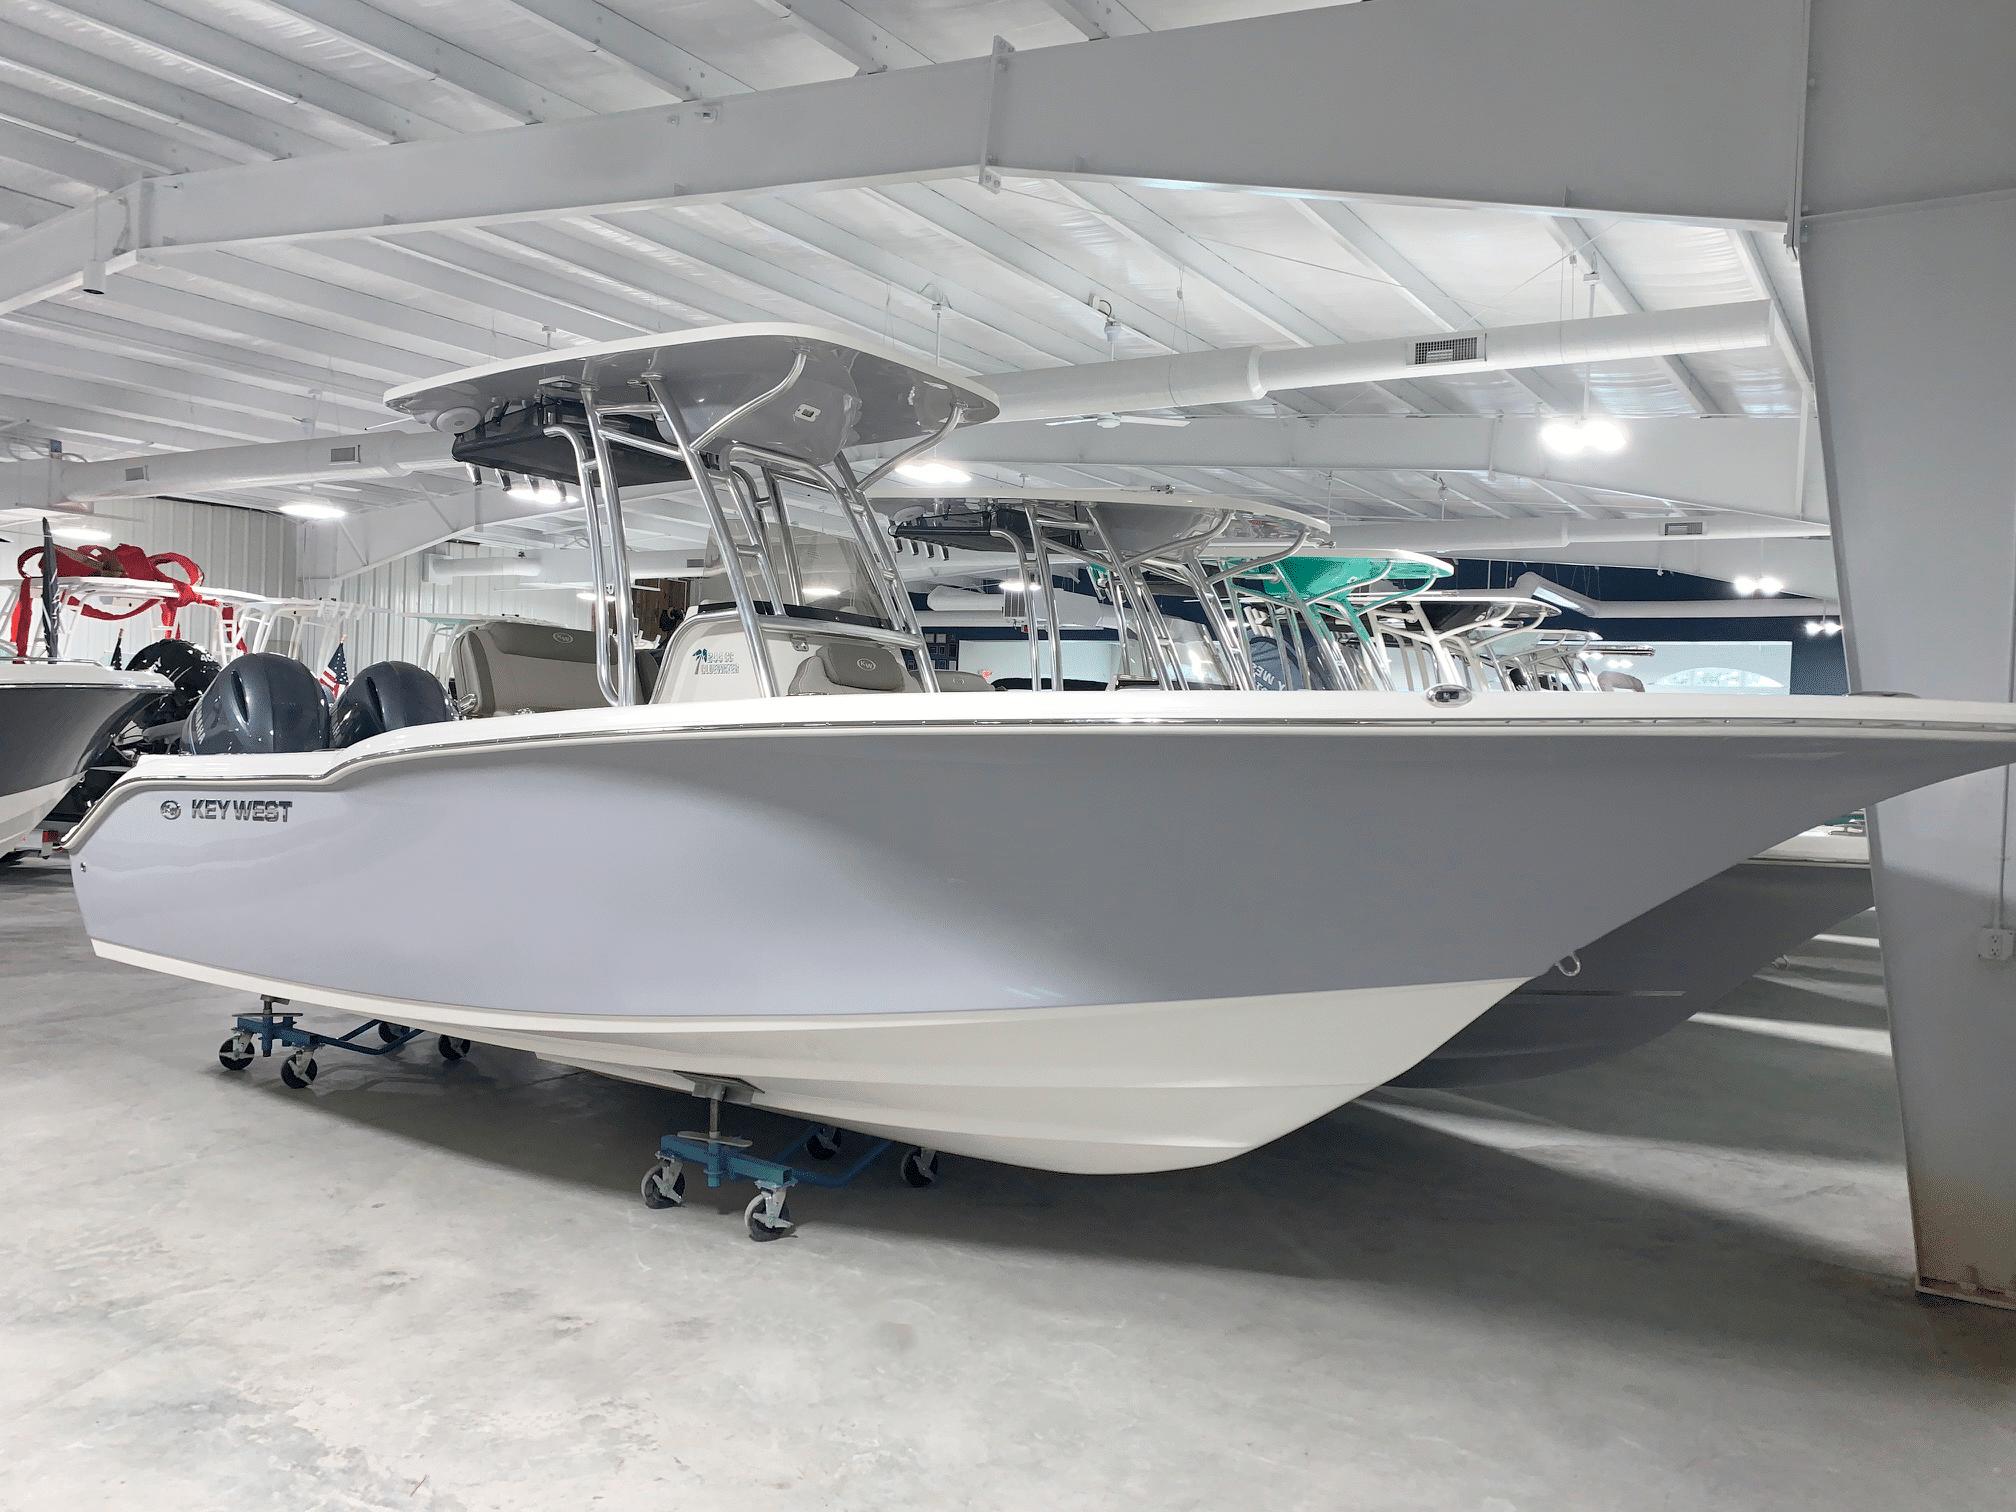 Key West 244 Center Console boats for sale in North Carolina - Boat Trader